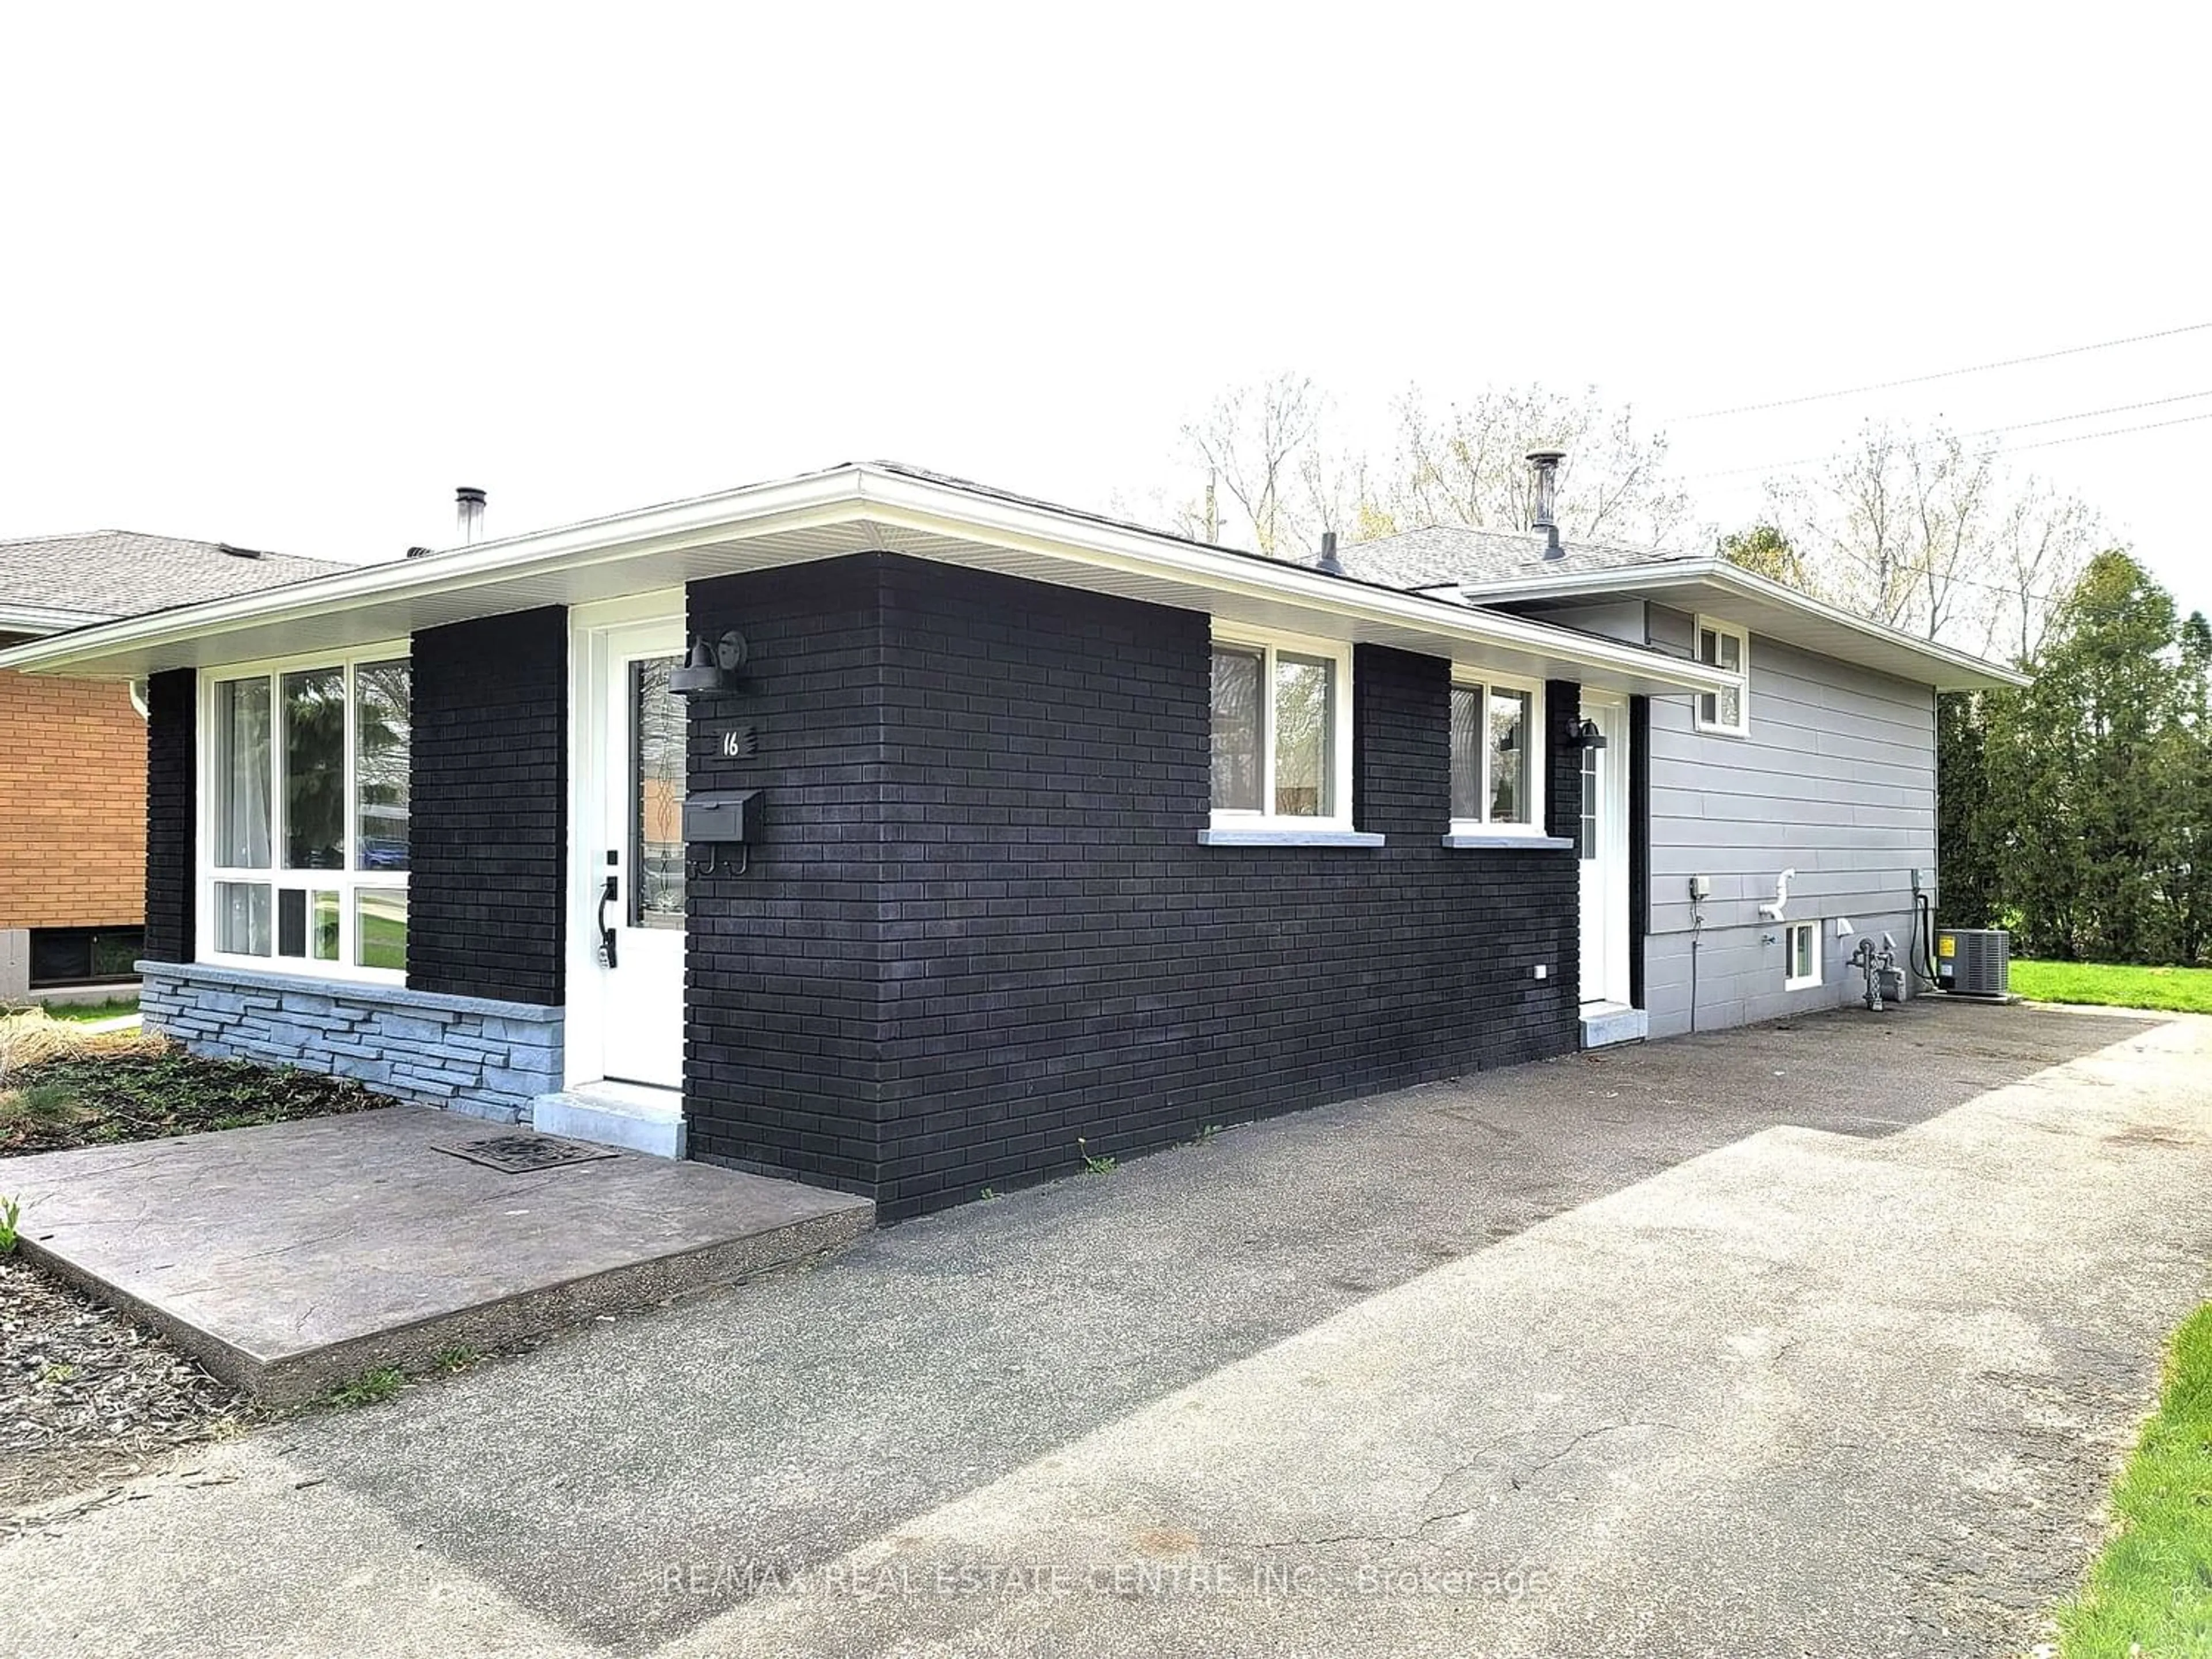 Outside view for 16 Linden Ave, Brantford Ontario N3S 7E2